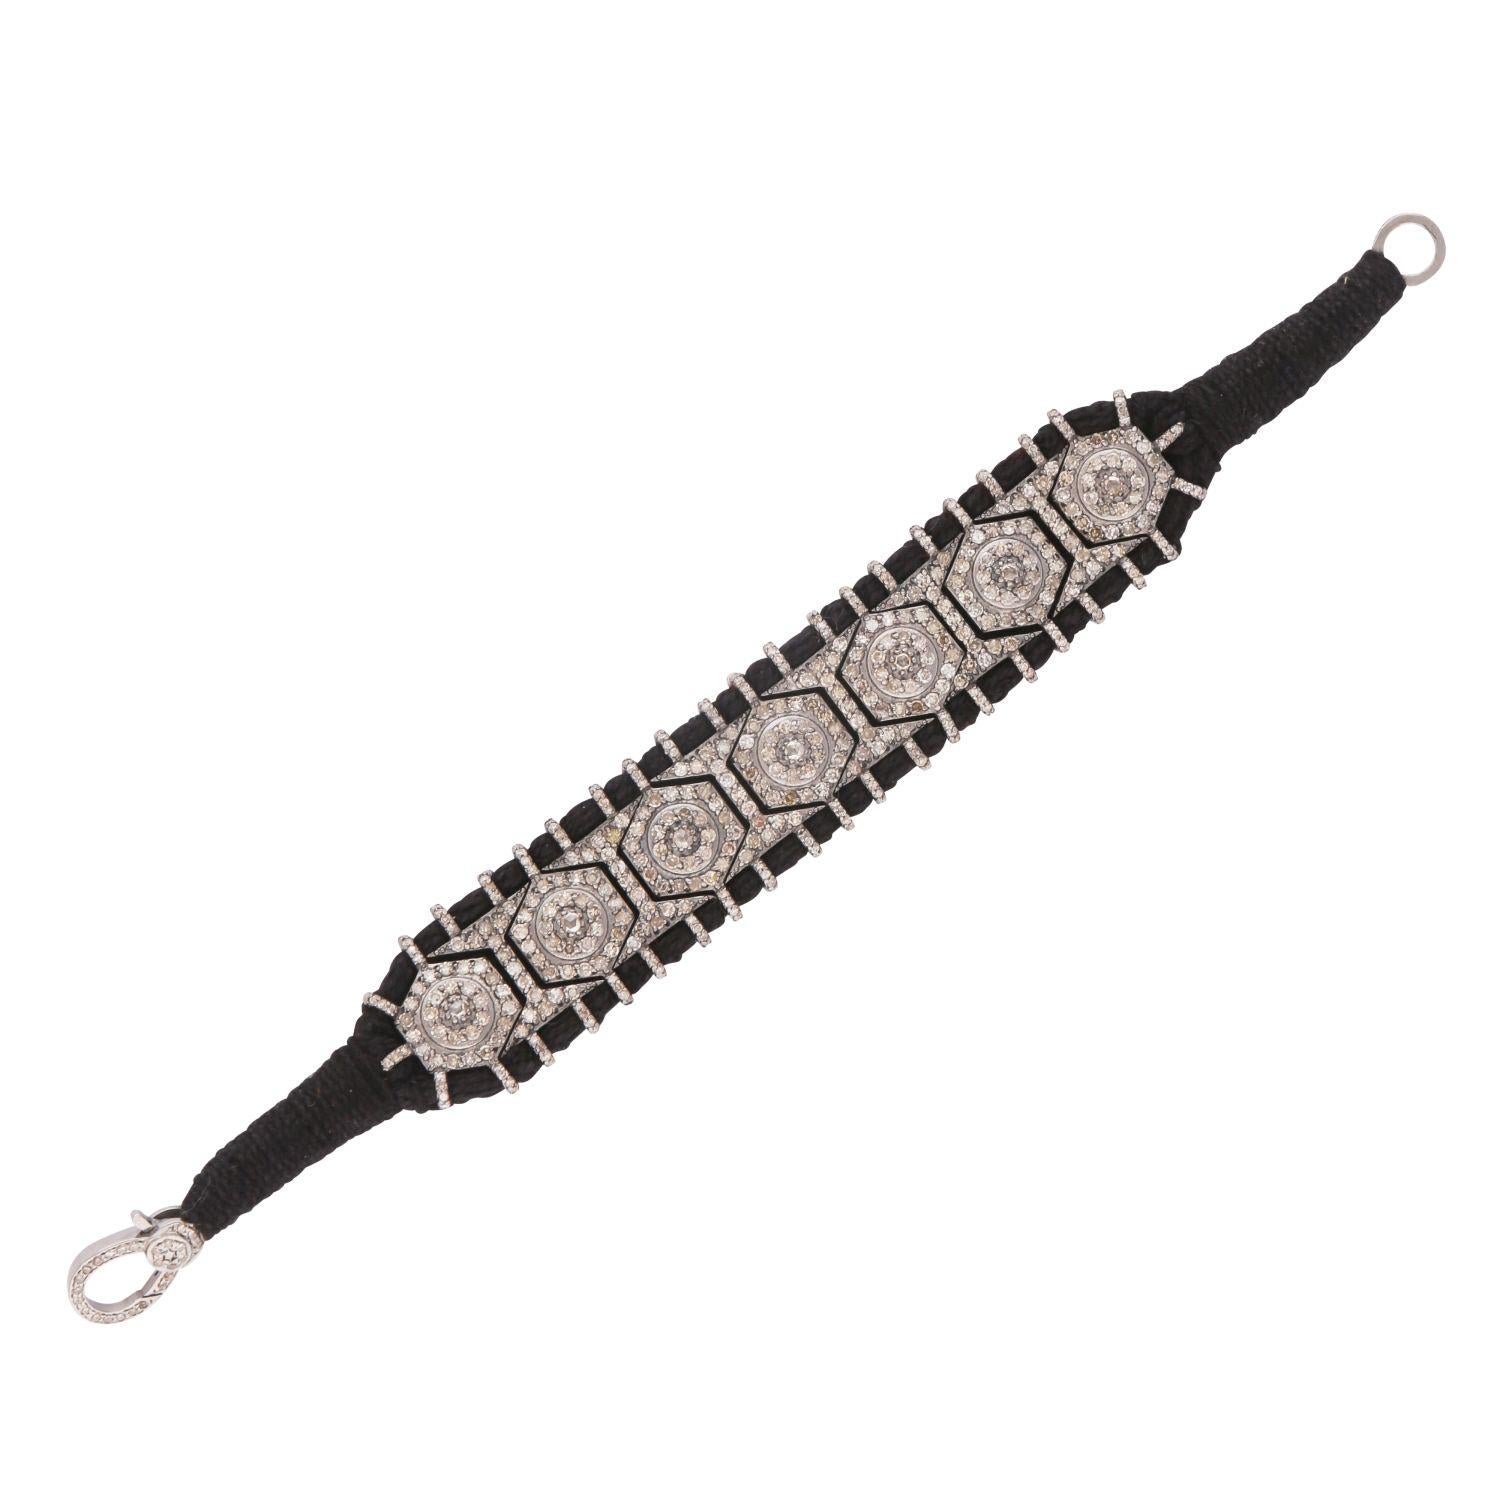 Inspired by the ancient traditional ‘baju’ bracelet from the 9th century, this bracelet is re created with a more contemporary feel.

Set on black cotton and silver, with 6.21 carat of small diamonds and 19.658 grams of silver.

It has a easy clasp